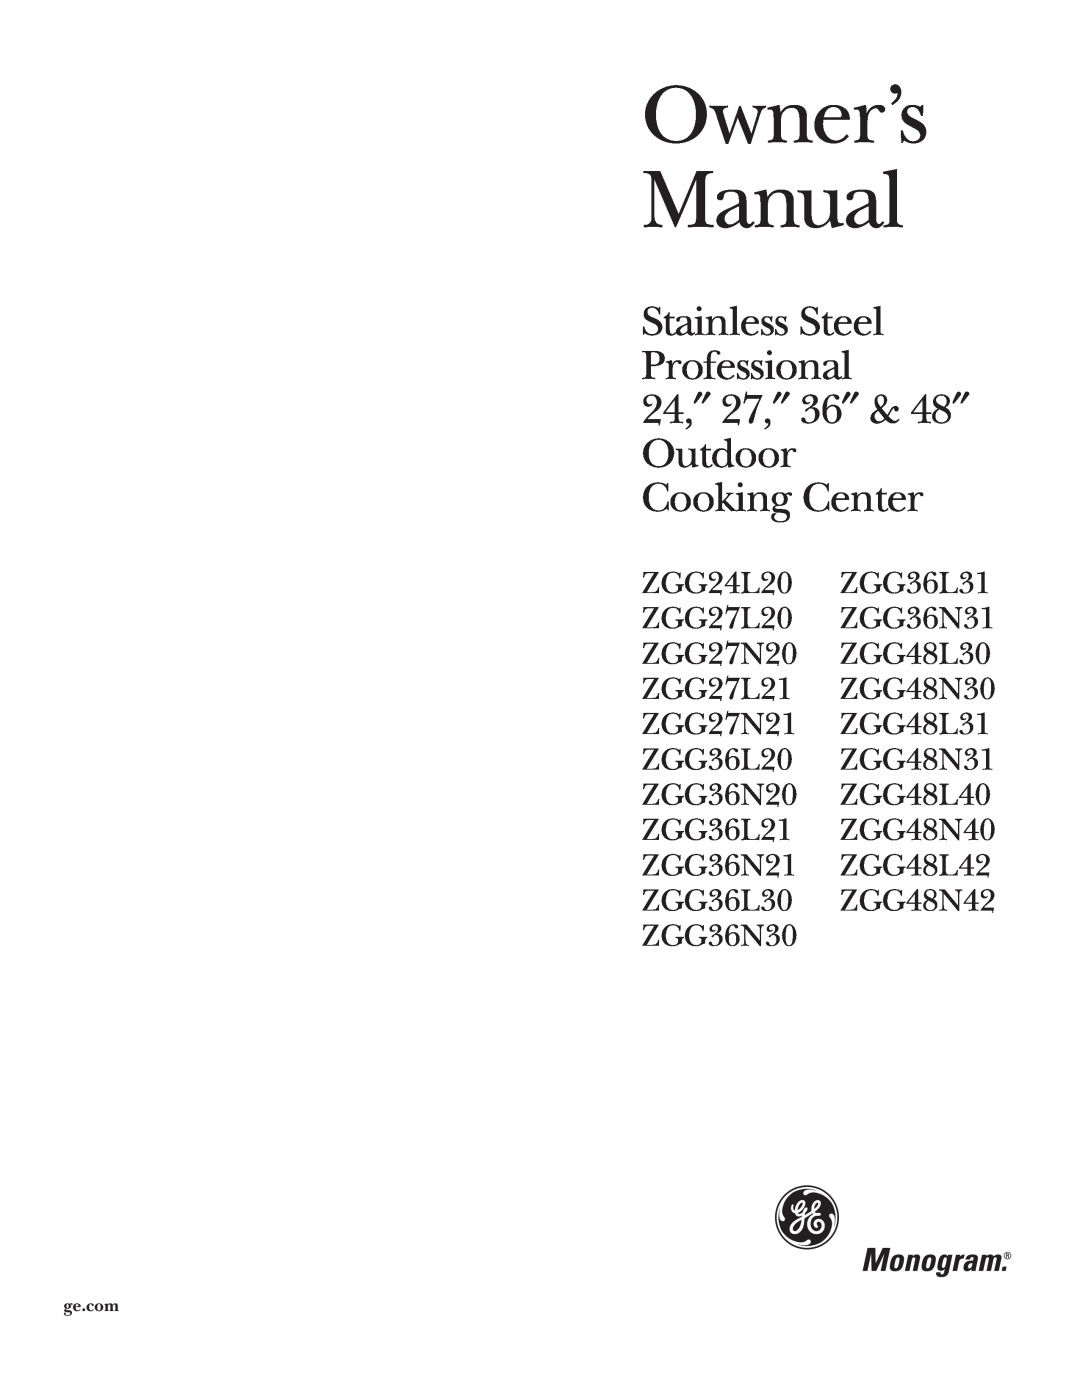 GE ZGG48N30, ZGG48N31, ZGG48L30 owner manual Stainless Steel Professional, 24,″ 27,″ 36″ & 48″ Outdoor Cooking Center 